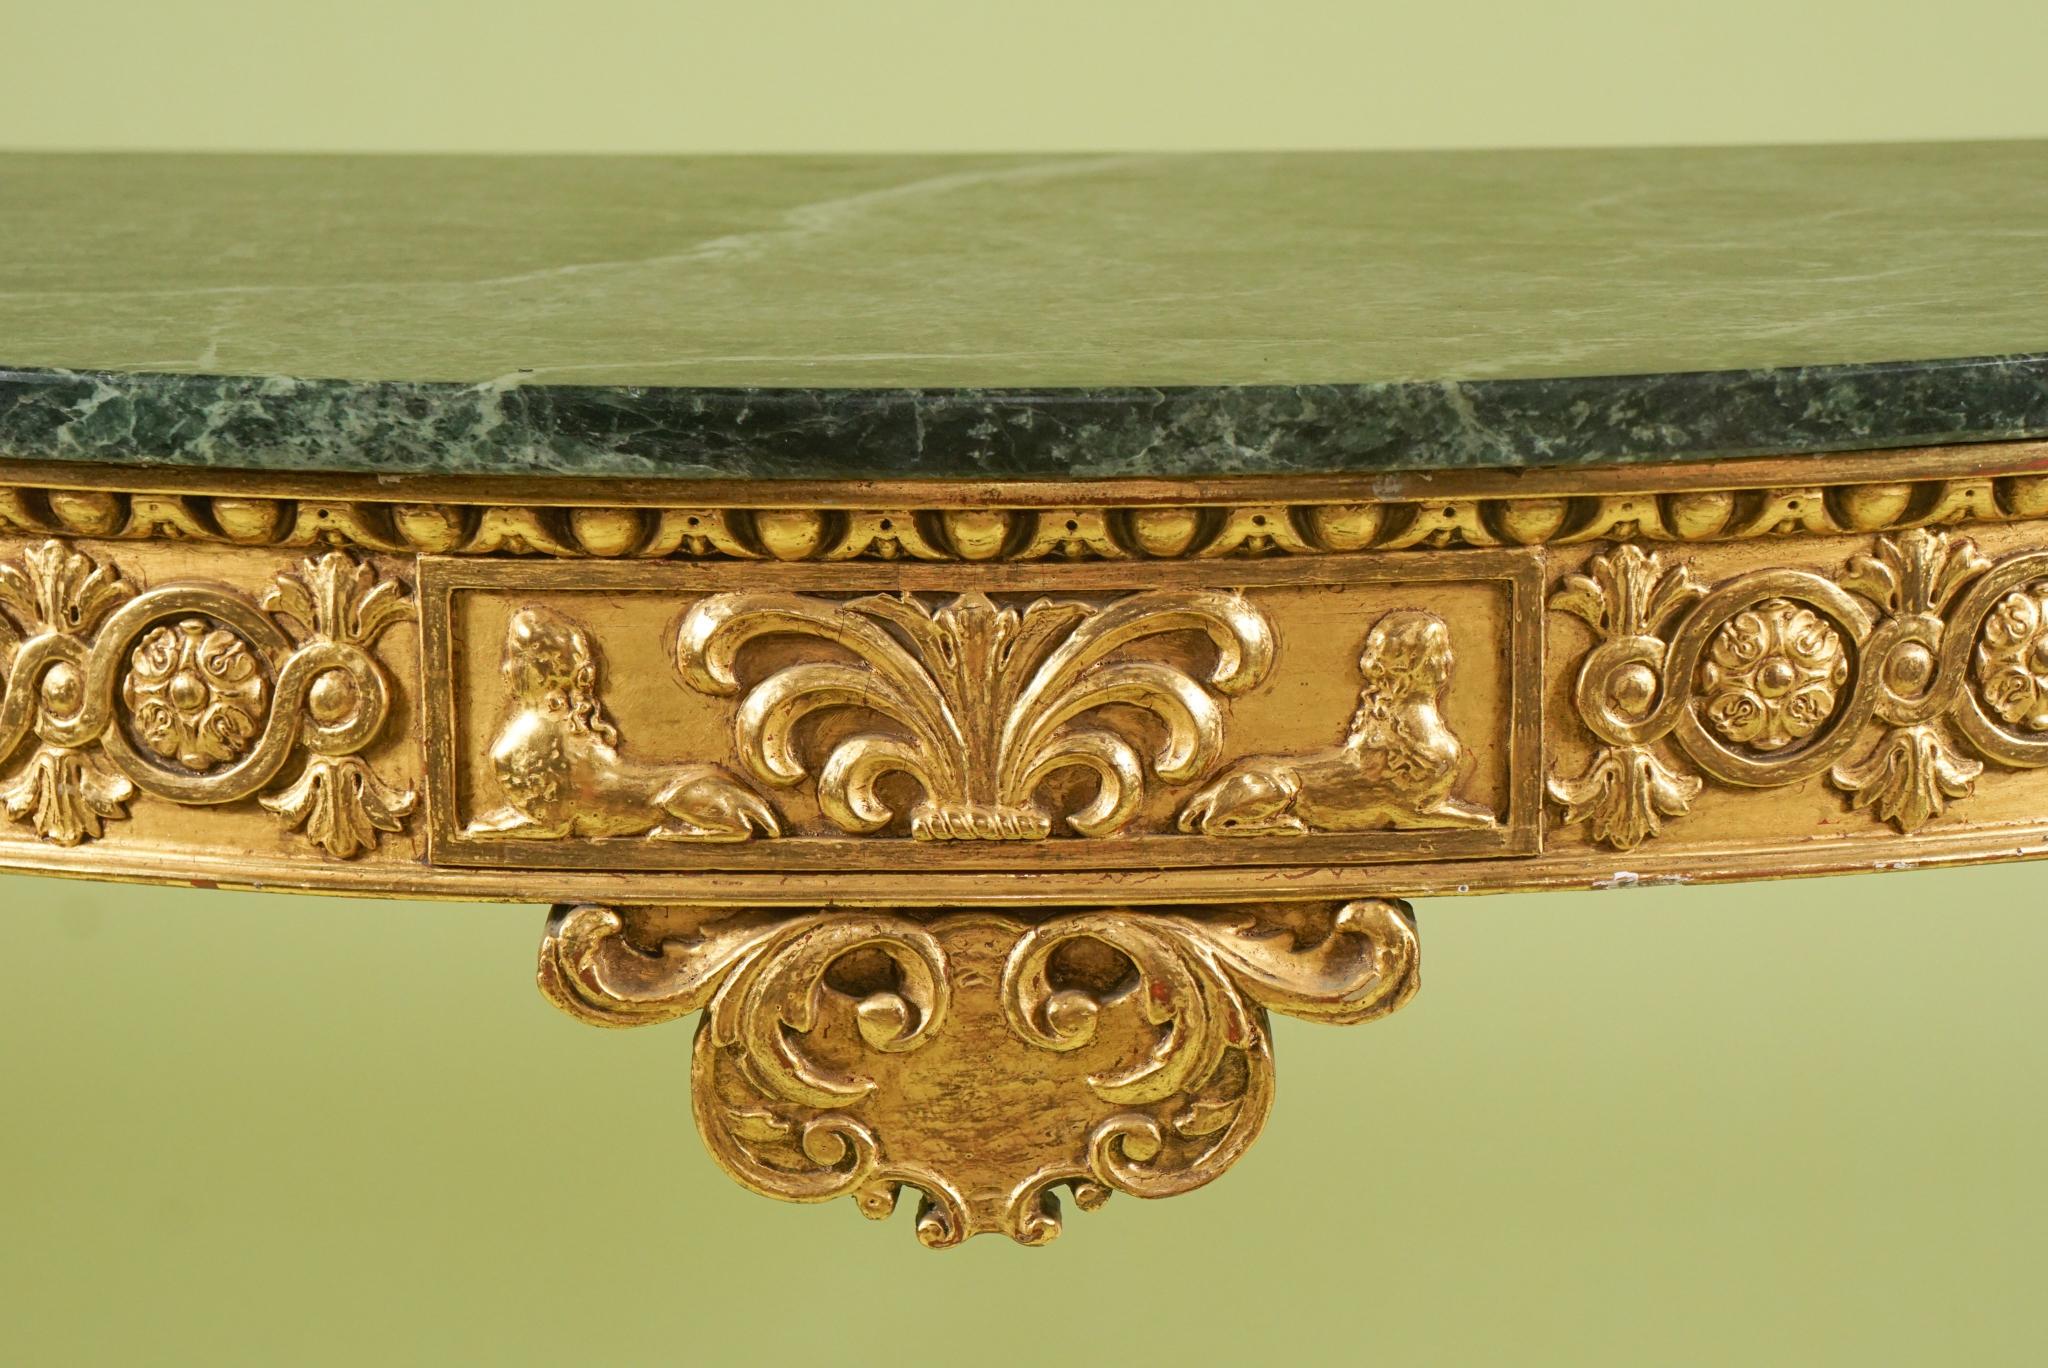 This pair of fine old gilt consoles where made in England circa 1850. While not of the period they are only but 30 years out of the period and exhibit many of the important details one would expect of Georgian furniture. Crafted in pine that has